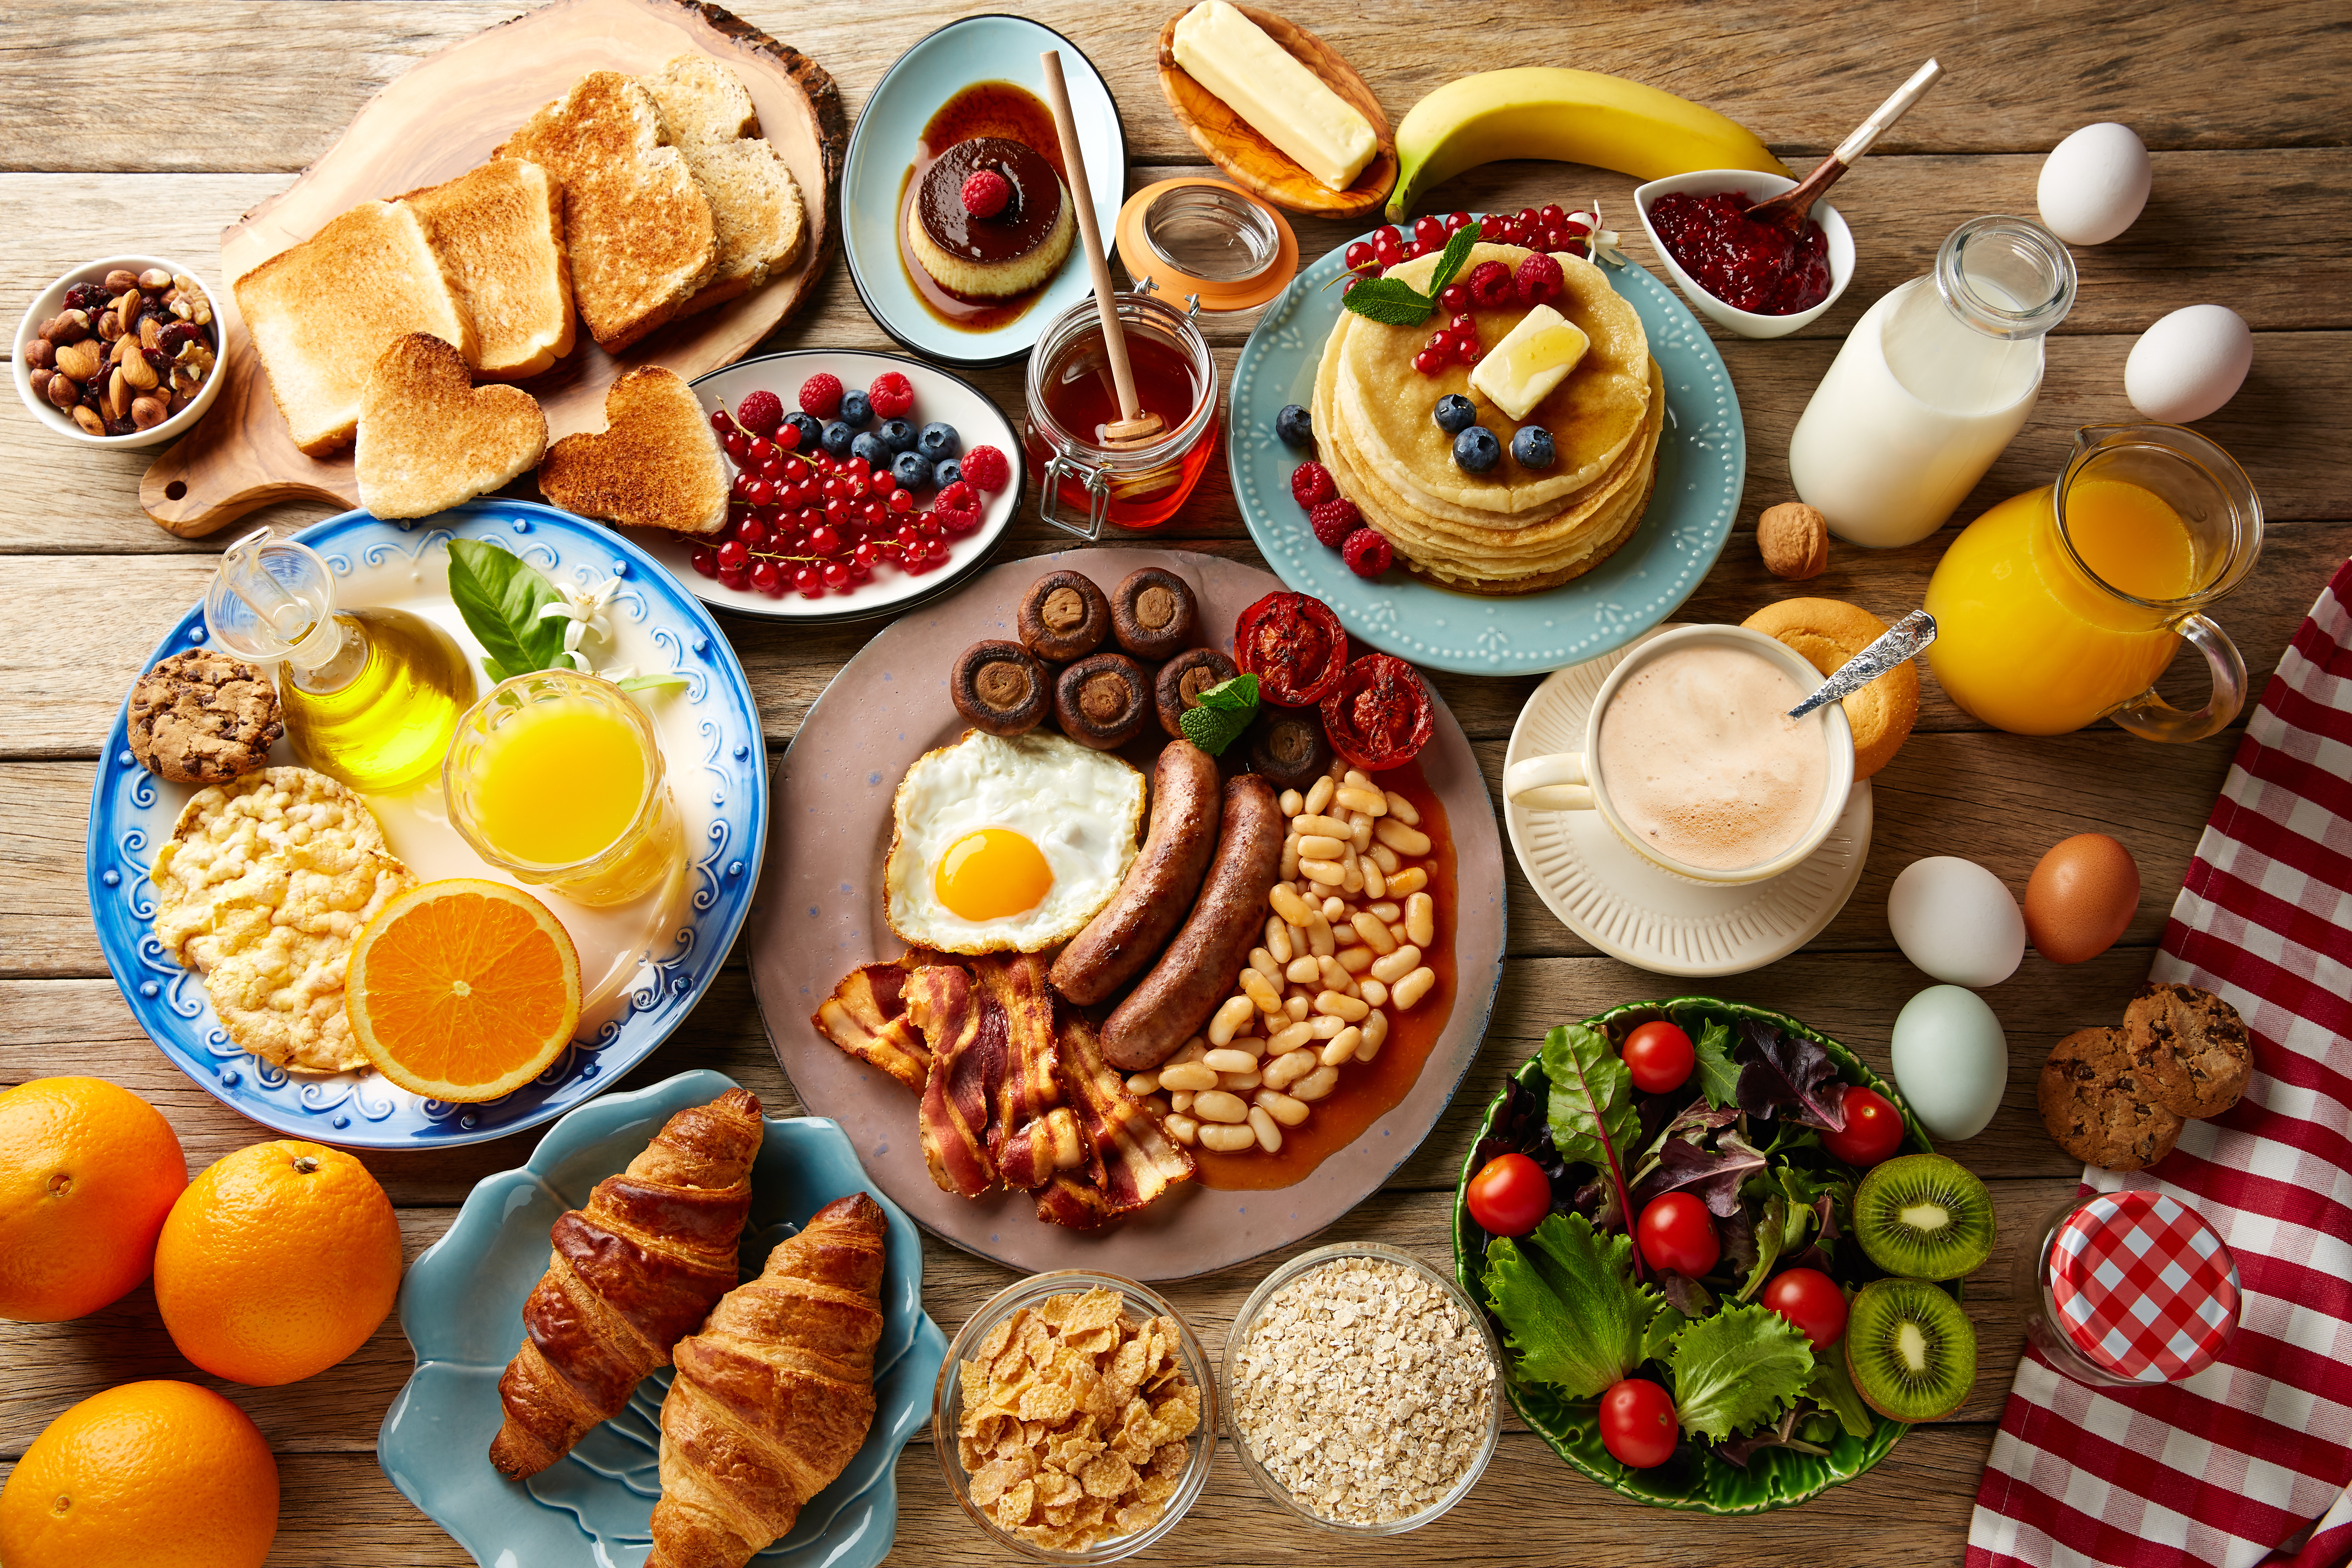 Several plates of breakfast food, including eggs, sausage, pancakes, toast, croissants, and fresh oranges seen from above.